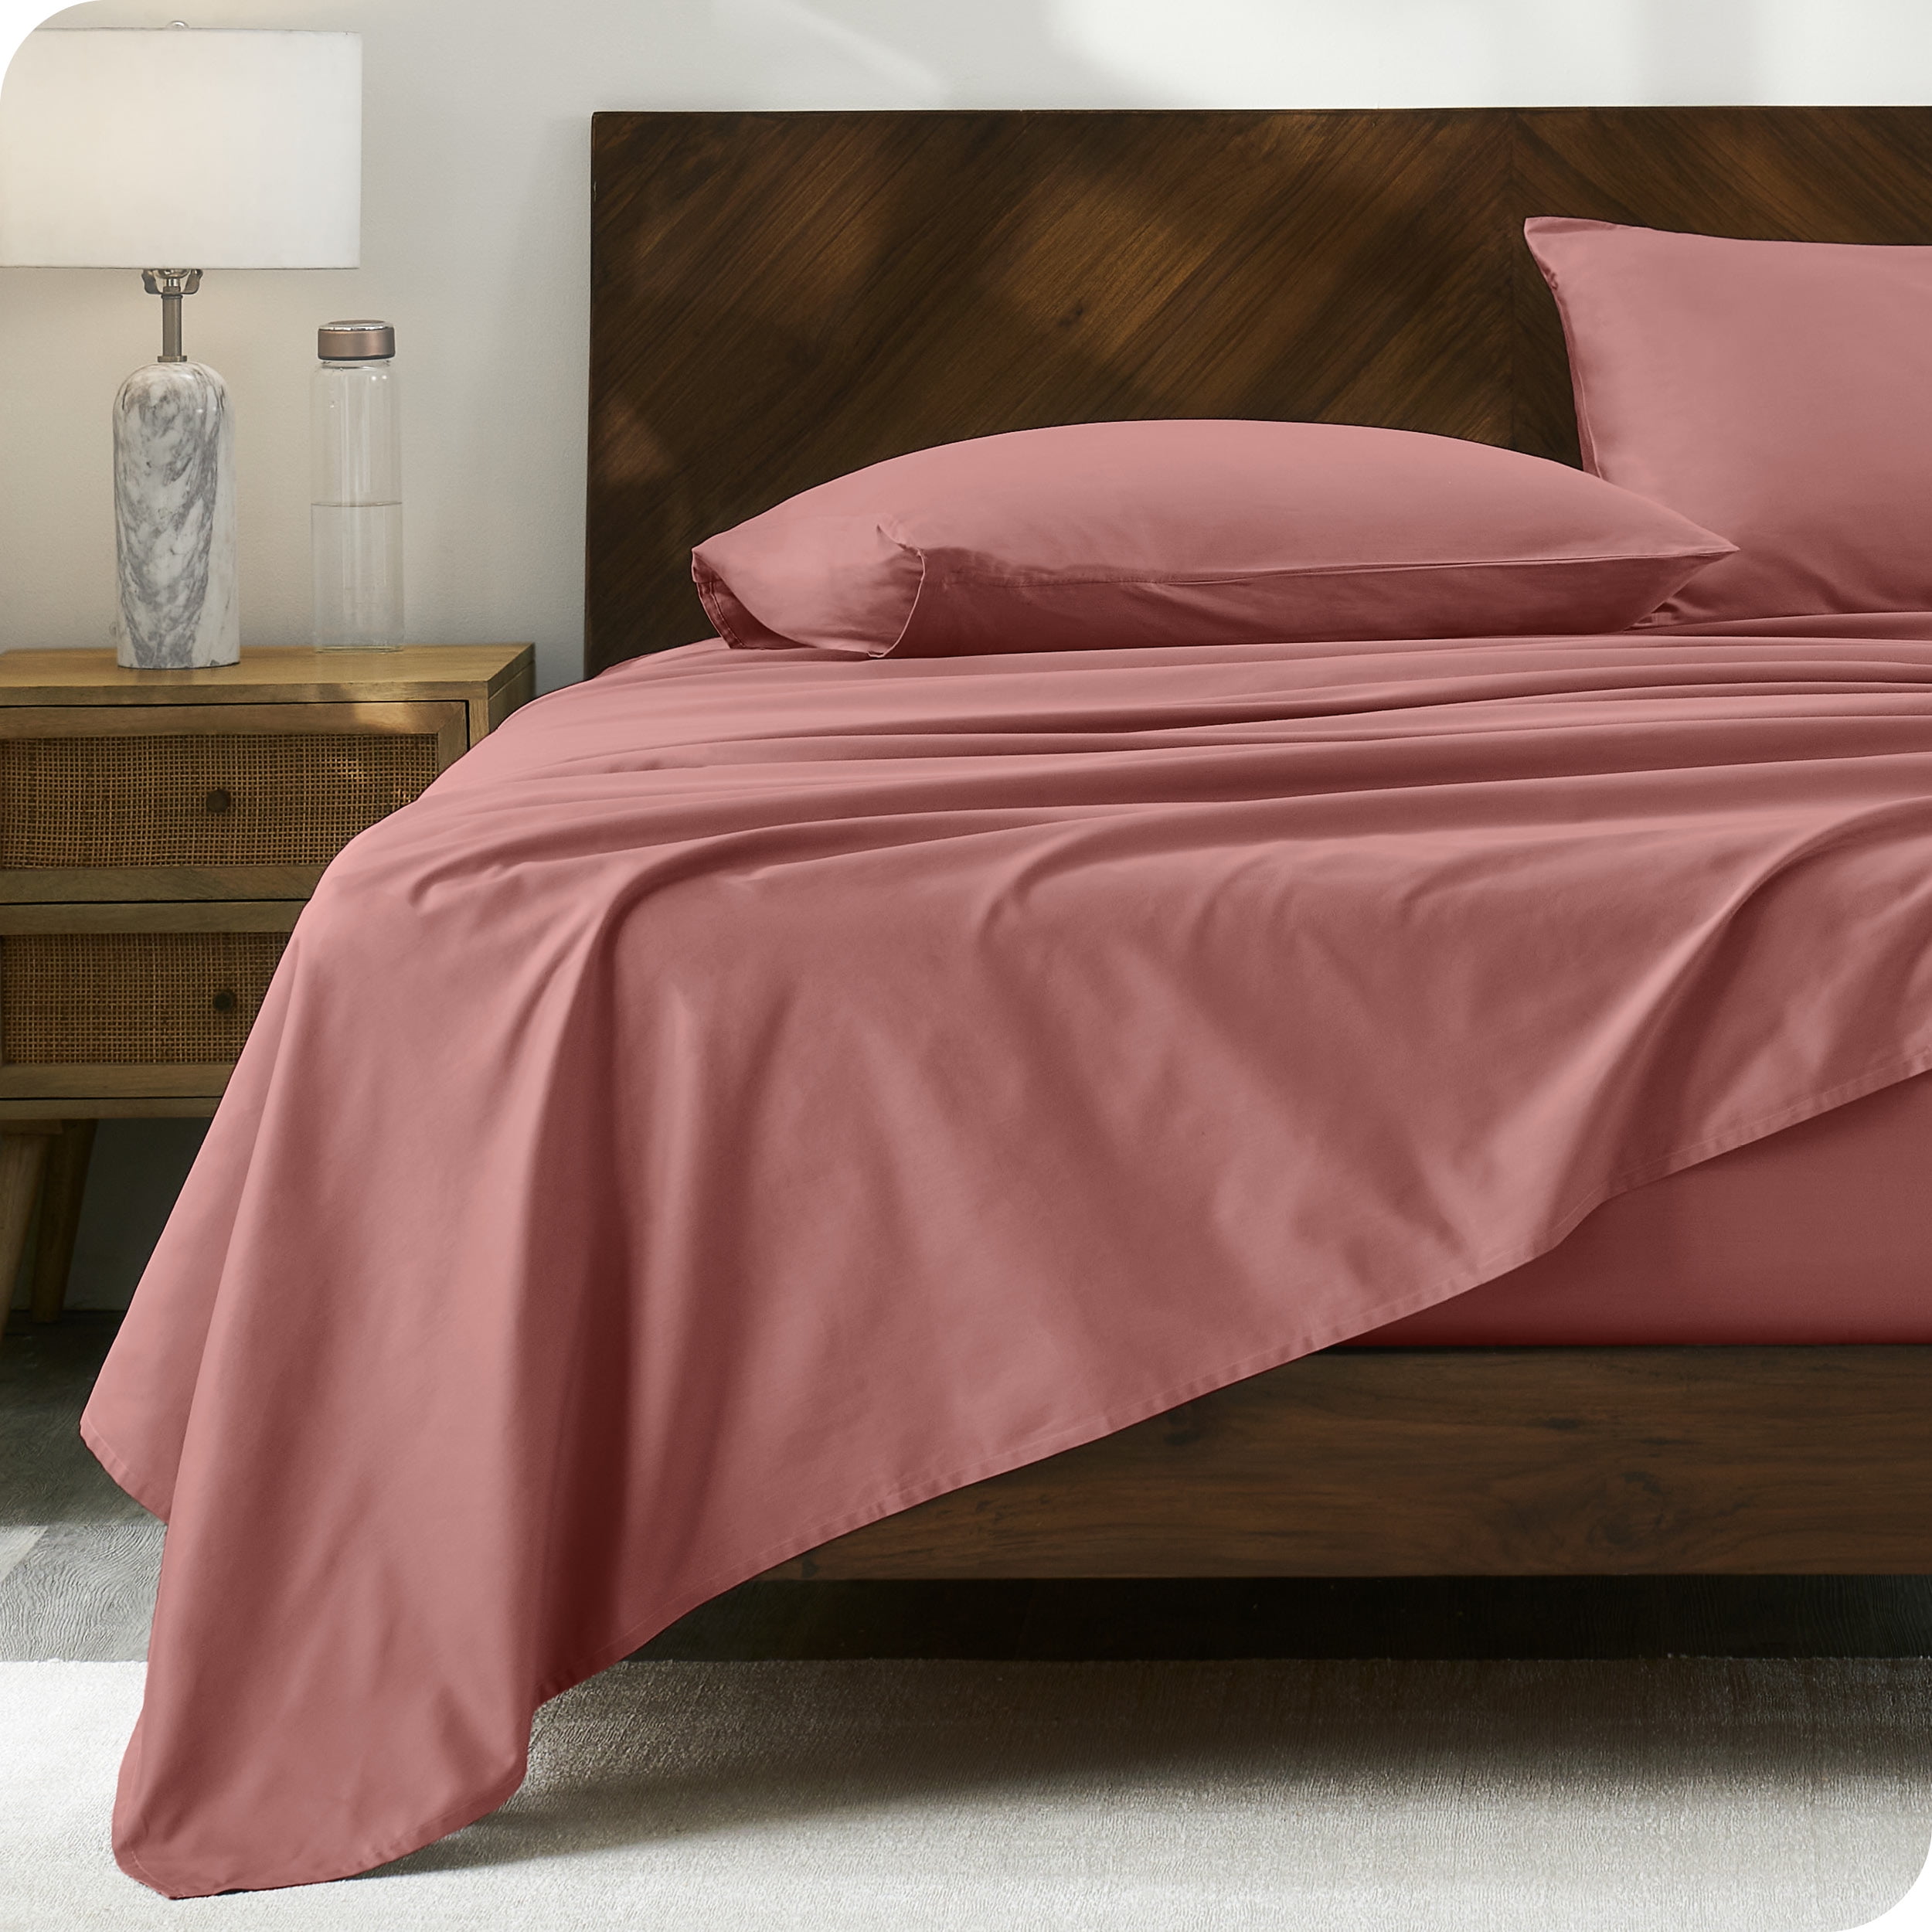 Bare Home Organic Percale Sheet Set - 300 Thread Count - 100